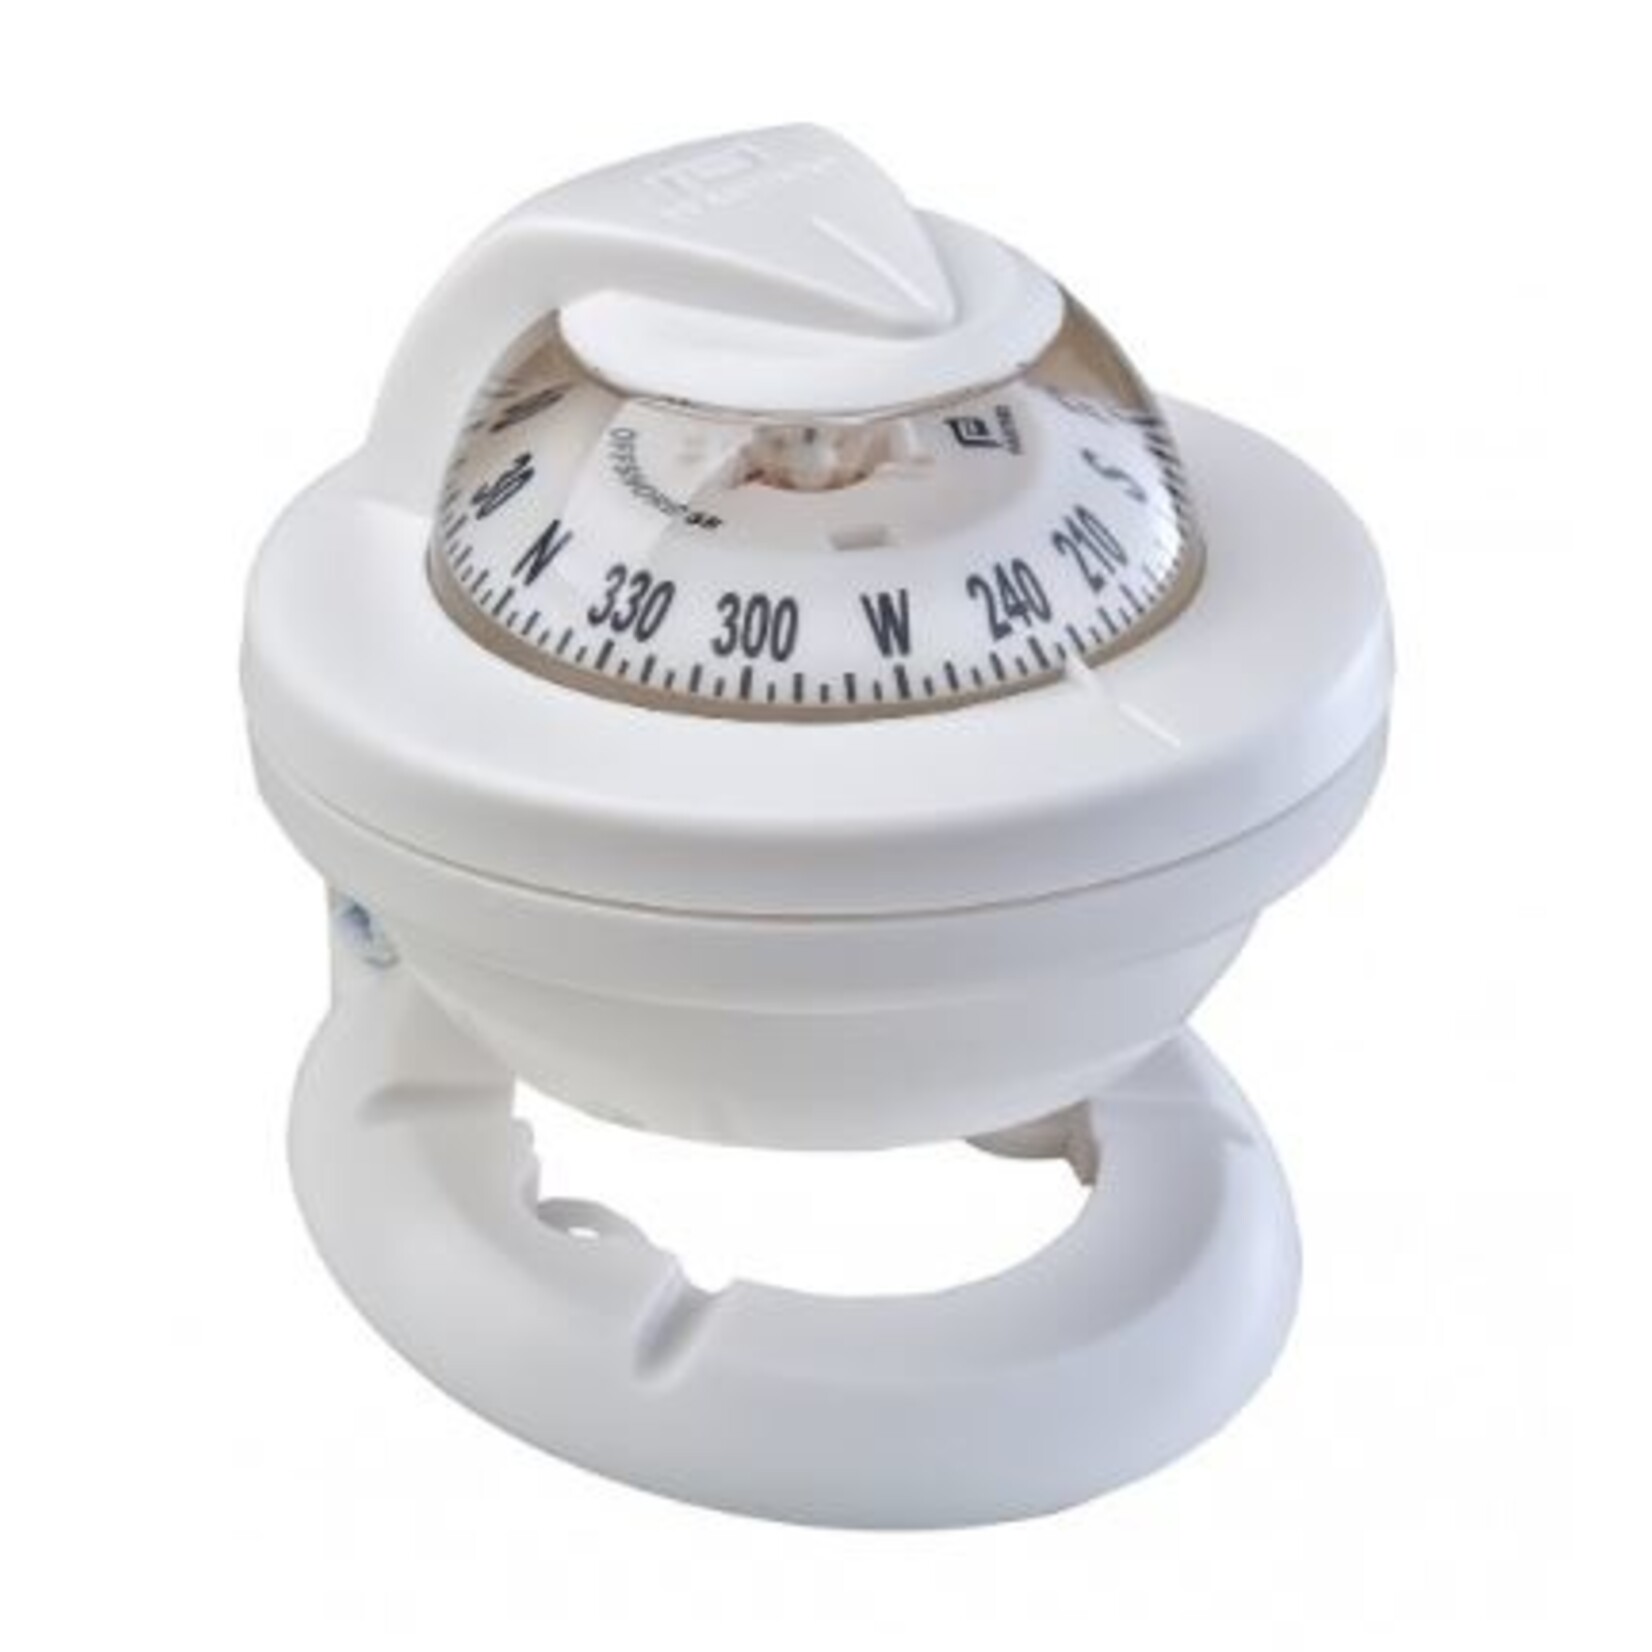 Plastimo Compass off55 brack whit whit card z/abc